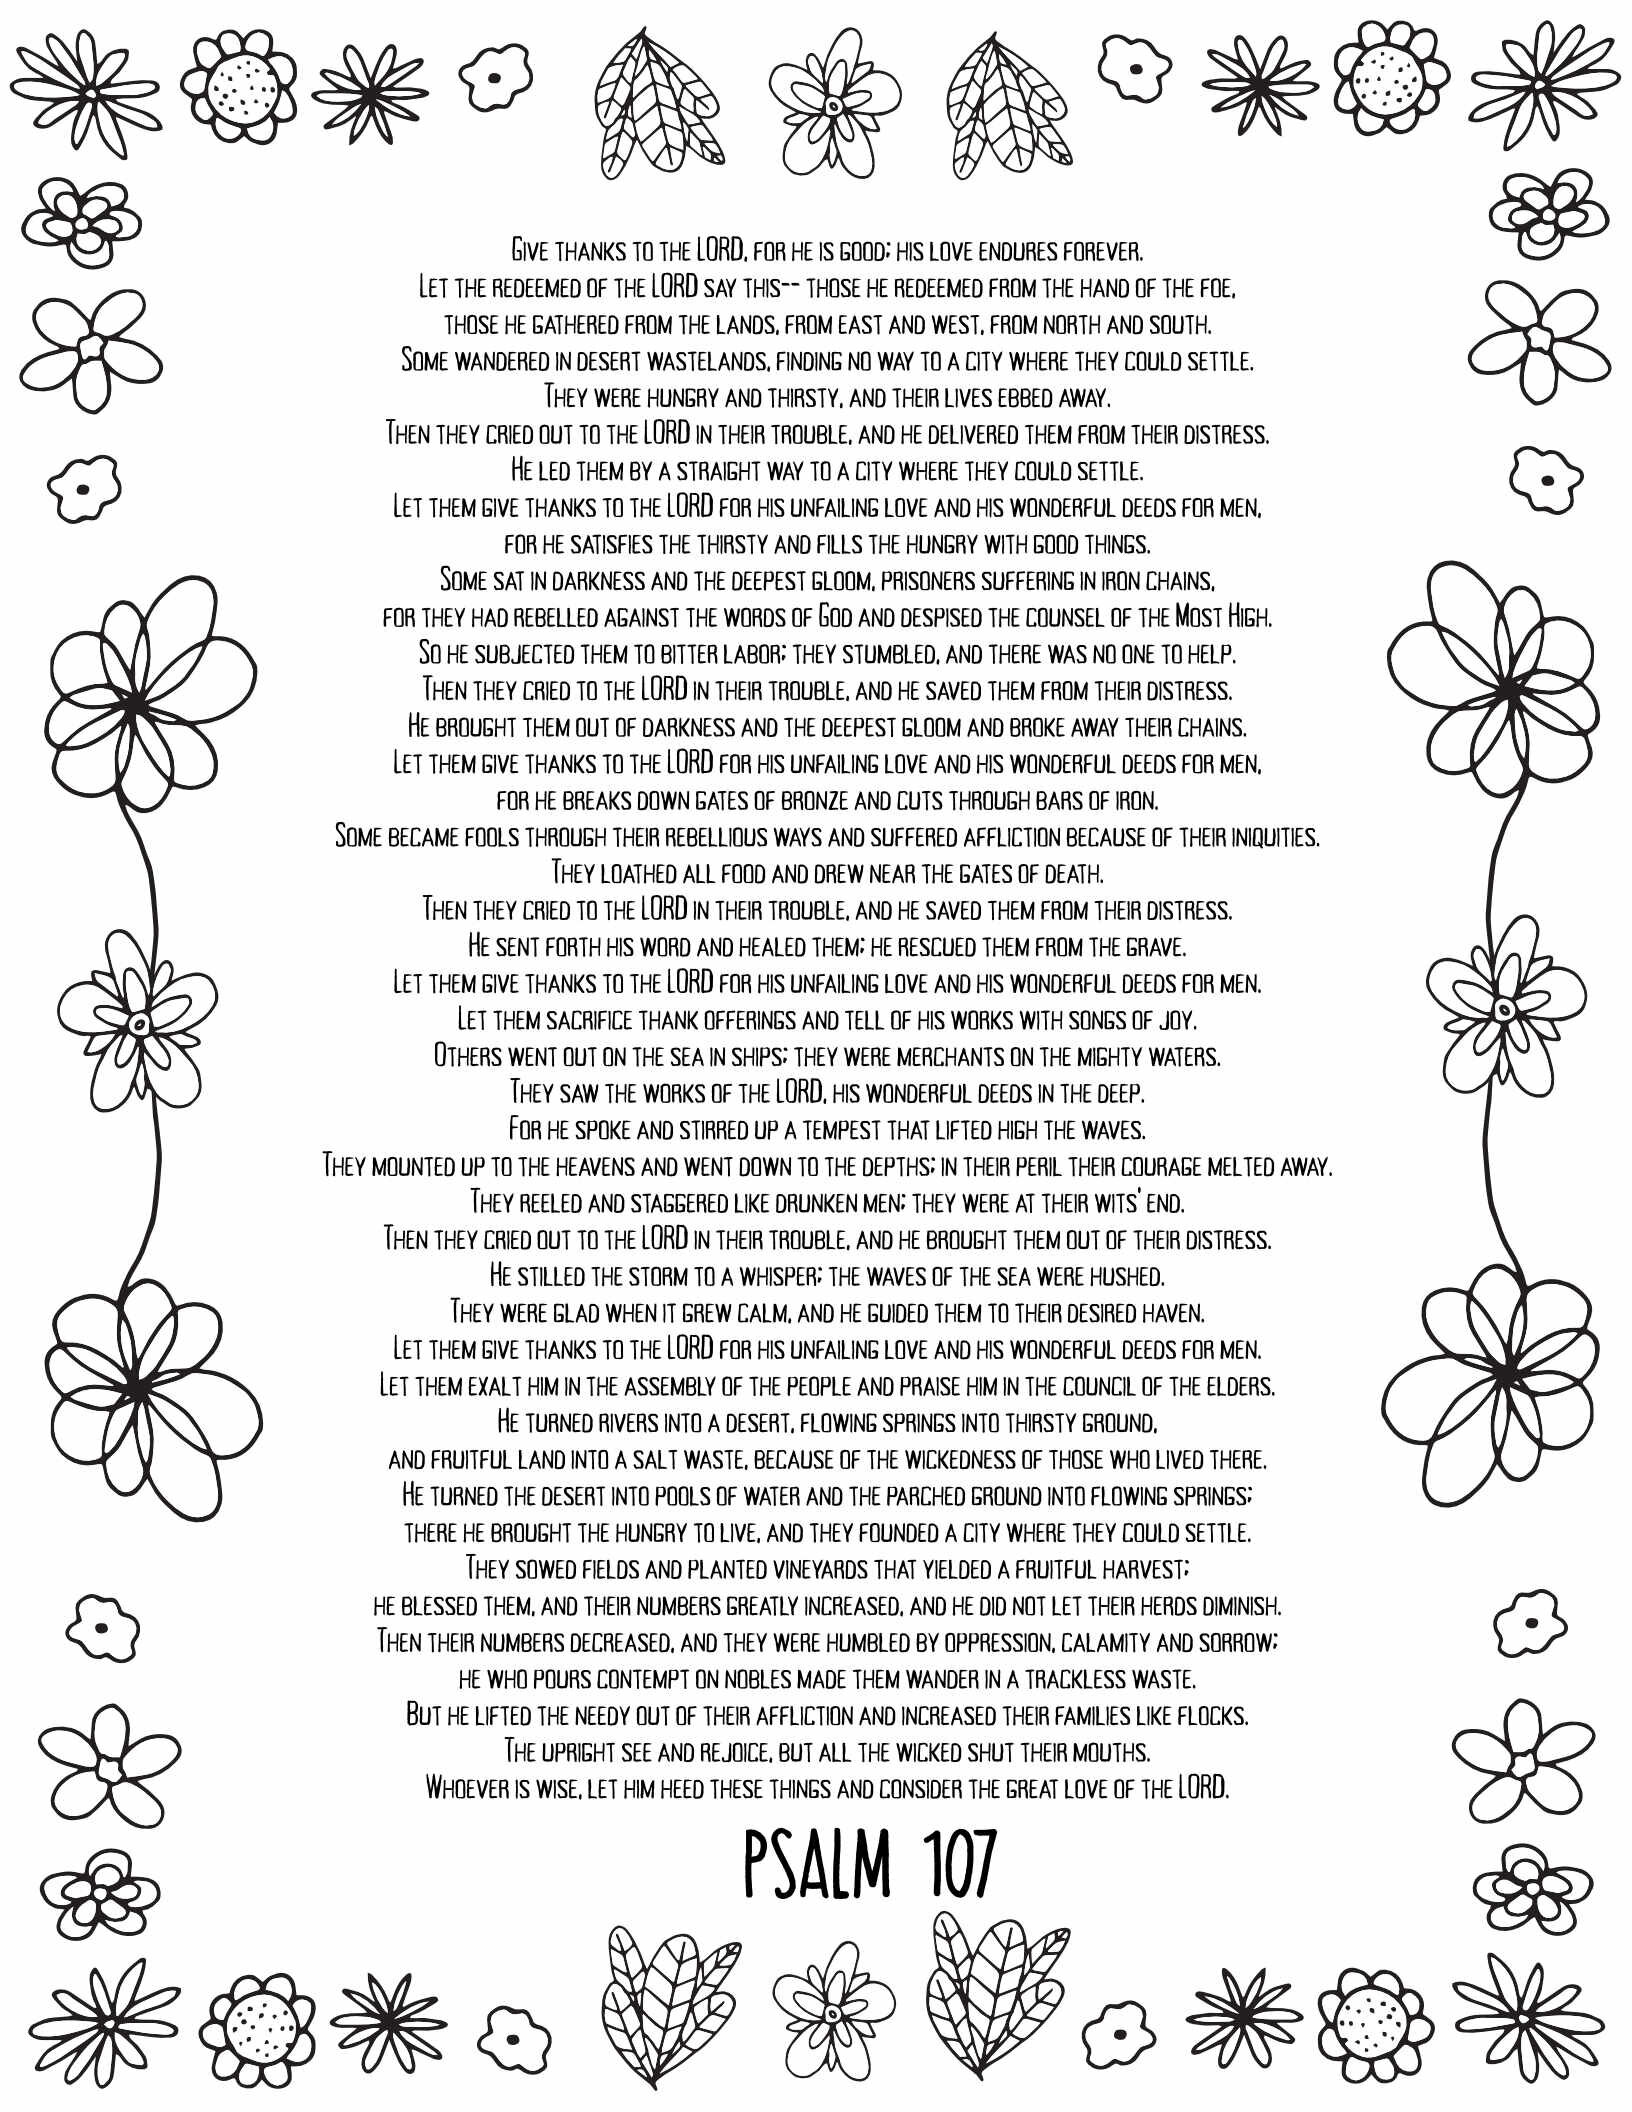 10 Free Printable Psalm Coloring Pages - Download and Color Adult Scripture - Psalm 107 CLICK HERE TO DOWNLOAD THIS PAGE FREE